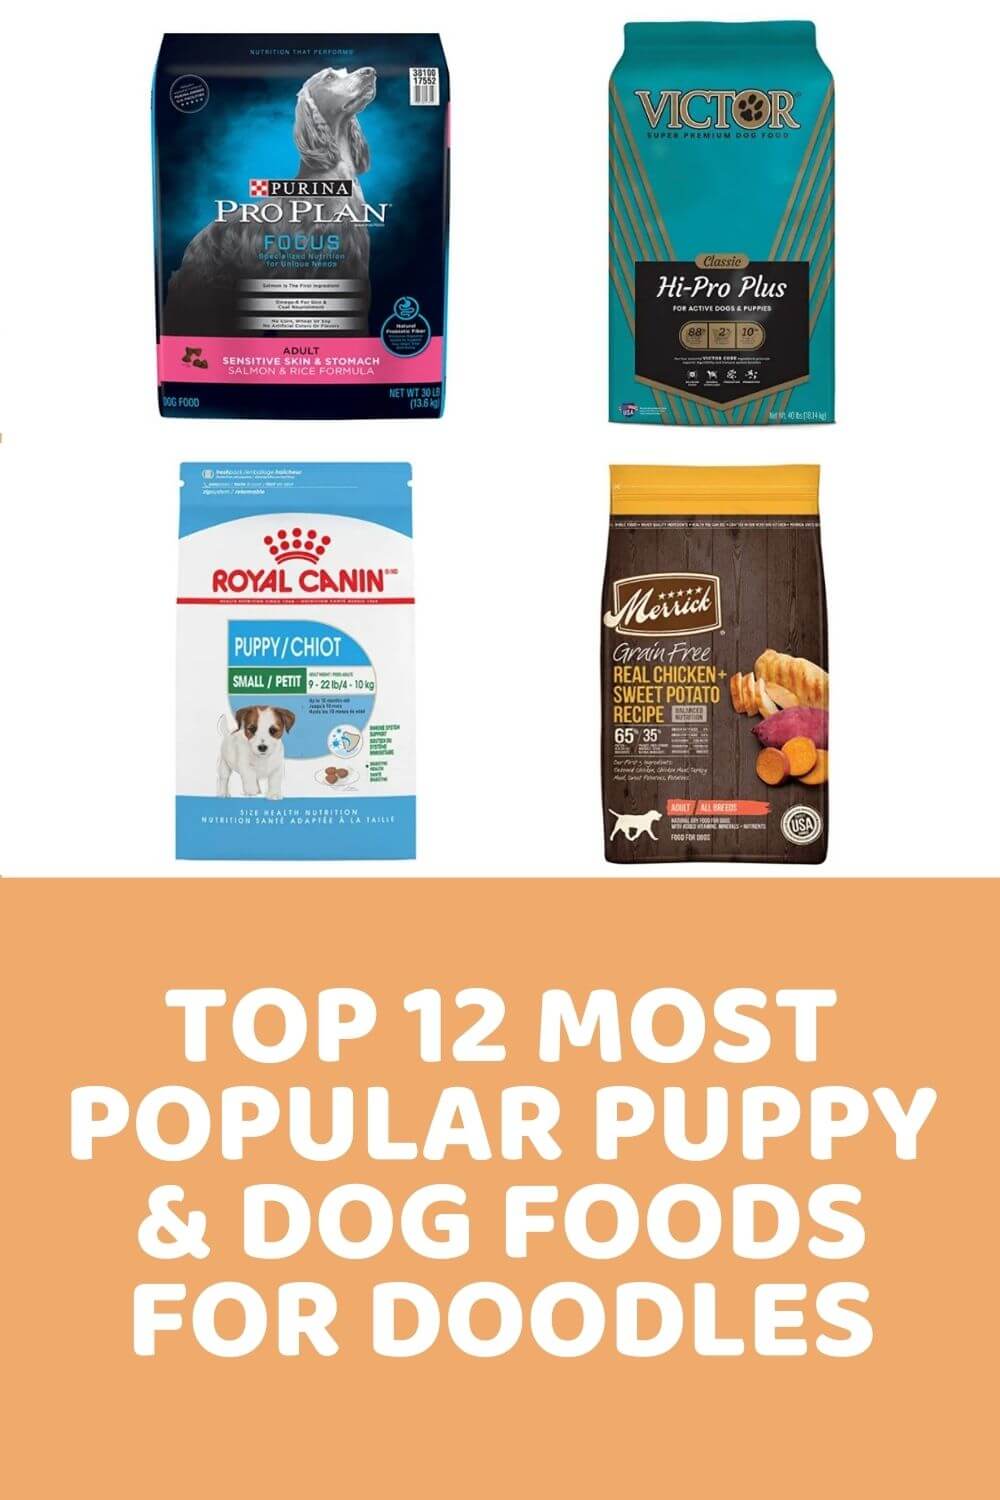 Top 12 Most Popular Puppy & Dog Foods For Doodles